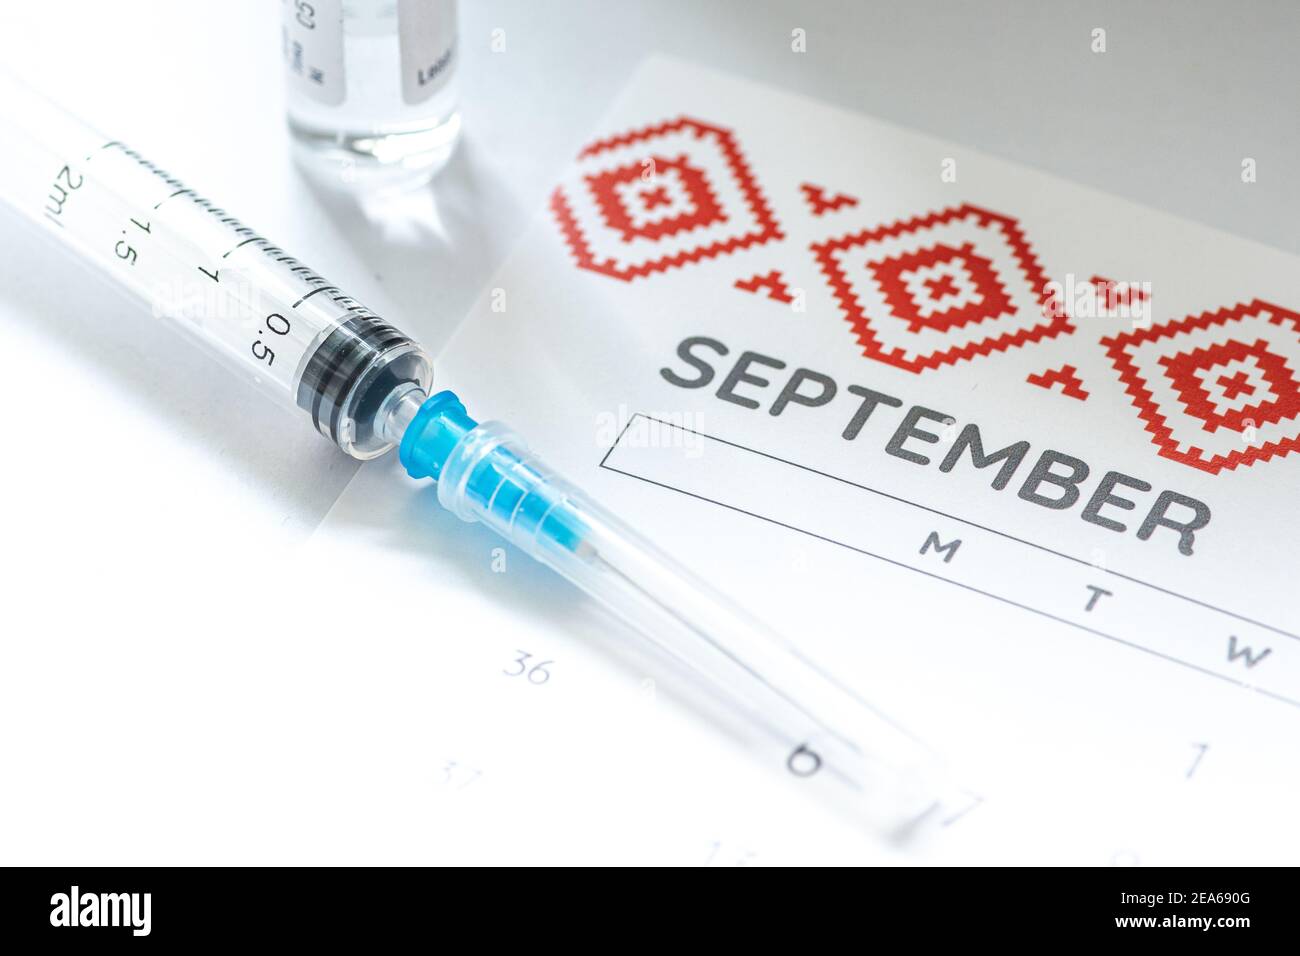 Syringe, glass vial or phial and calendar with month of September on a white table ready to be used. Covid or Coronavirus vaccine background, close up Stock Photo